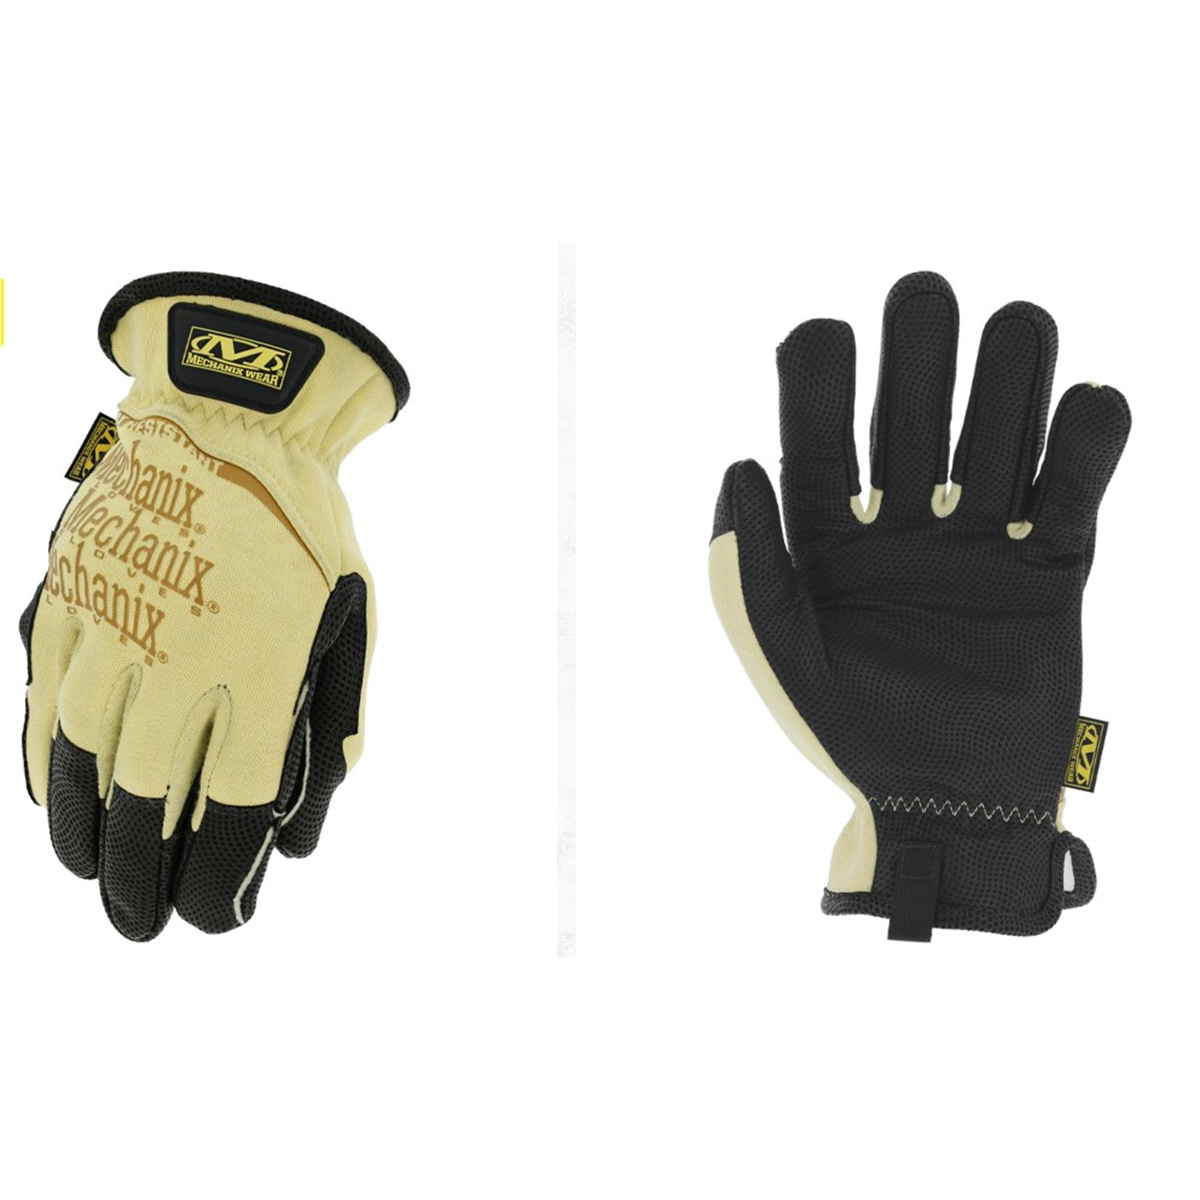 HEAT RESISTANT GLOVE (SMALL, YELLOW)